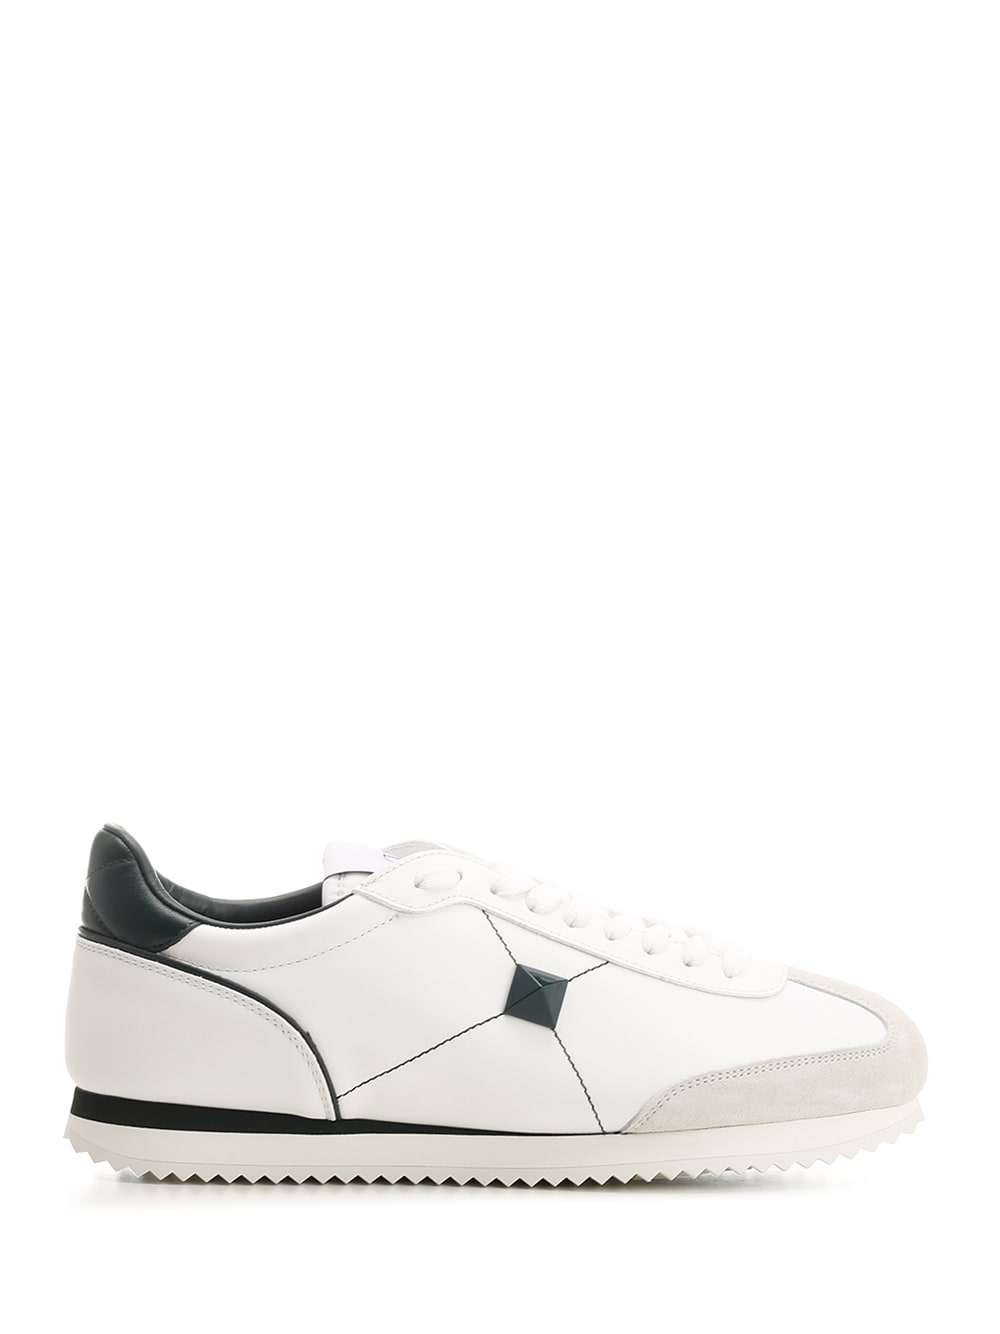 Shop Valentino Stud Sneakers In Green